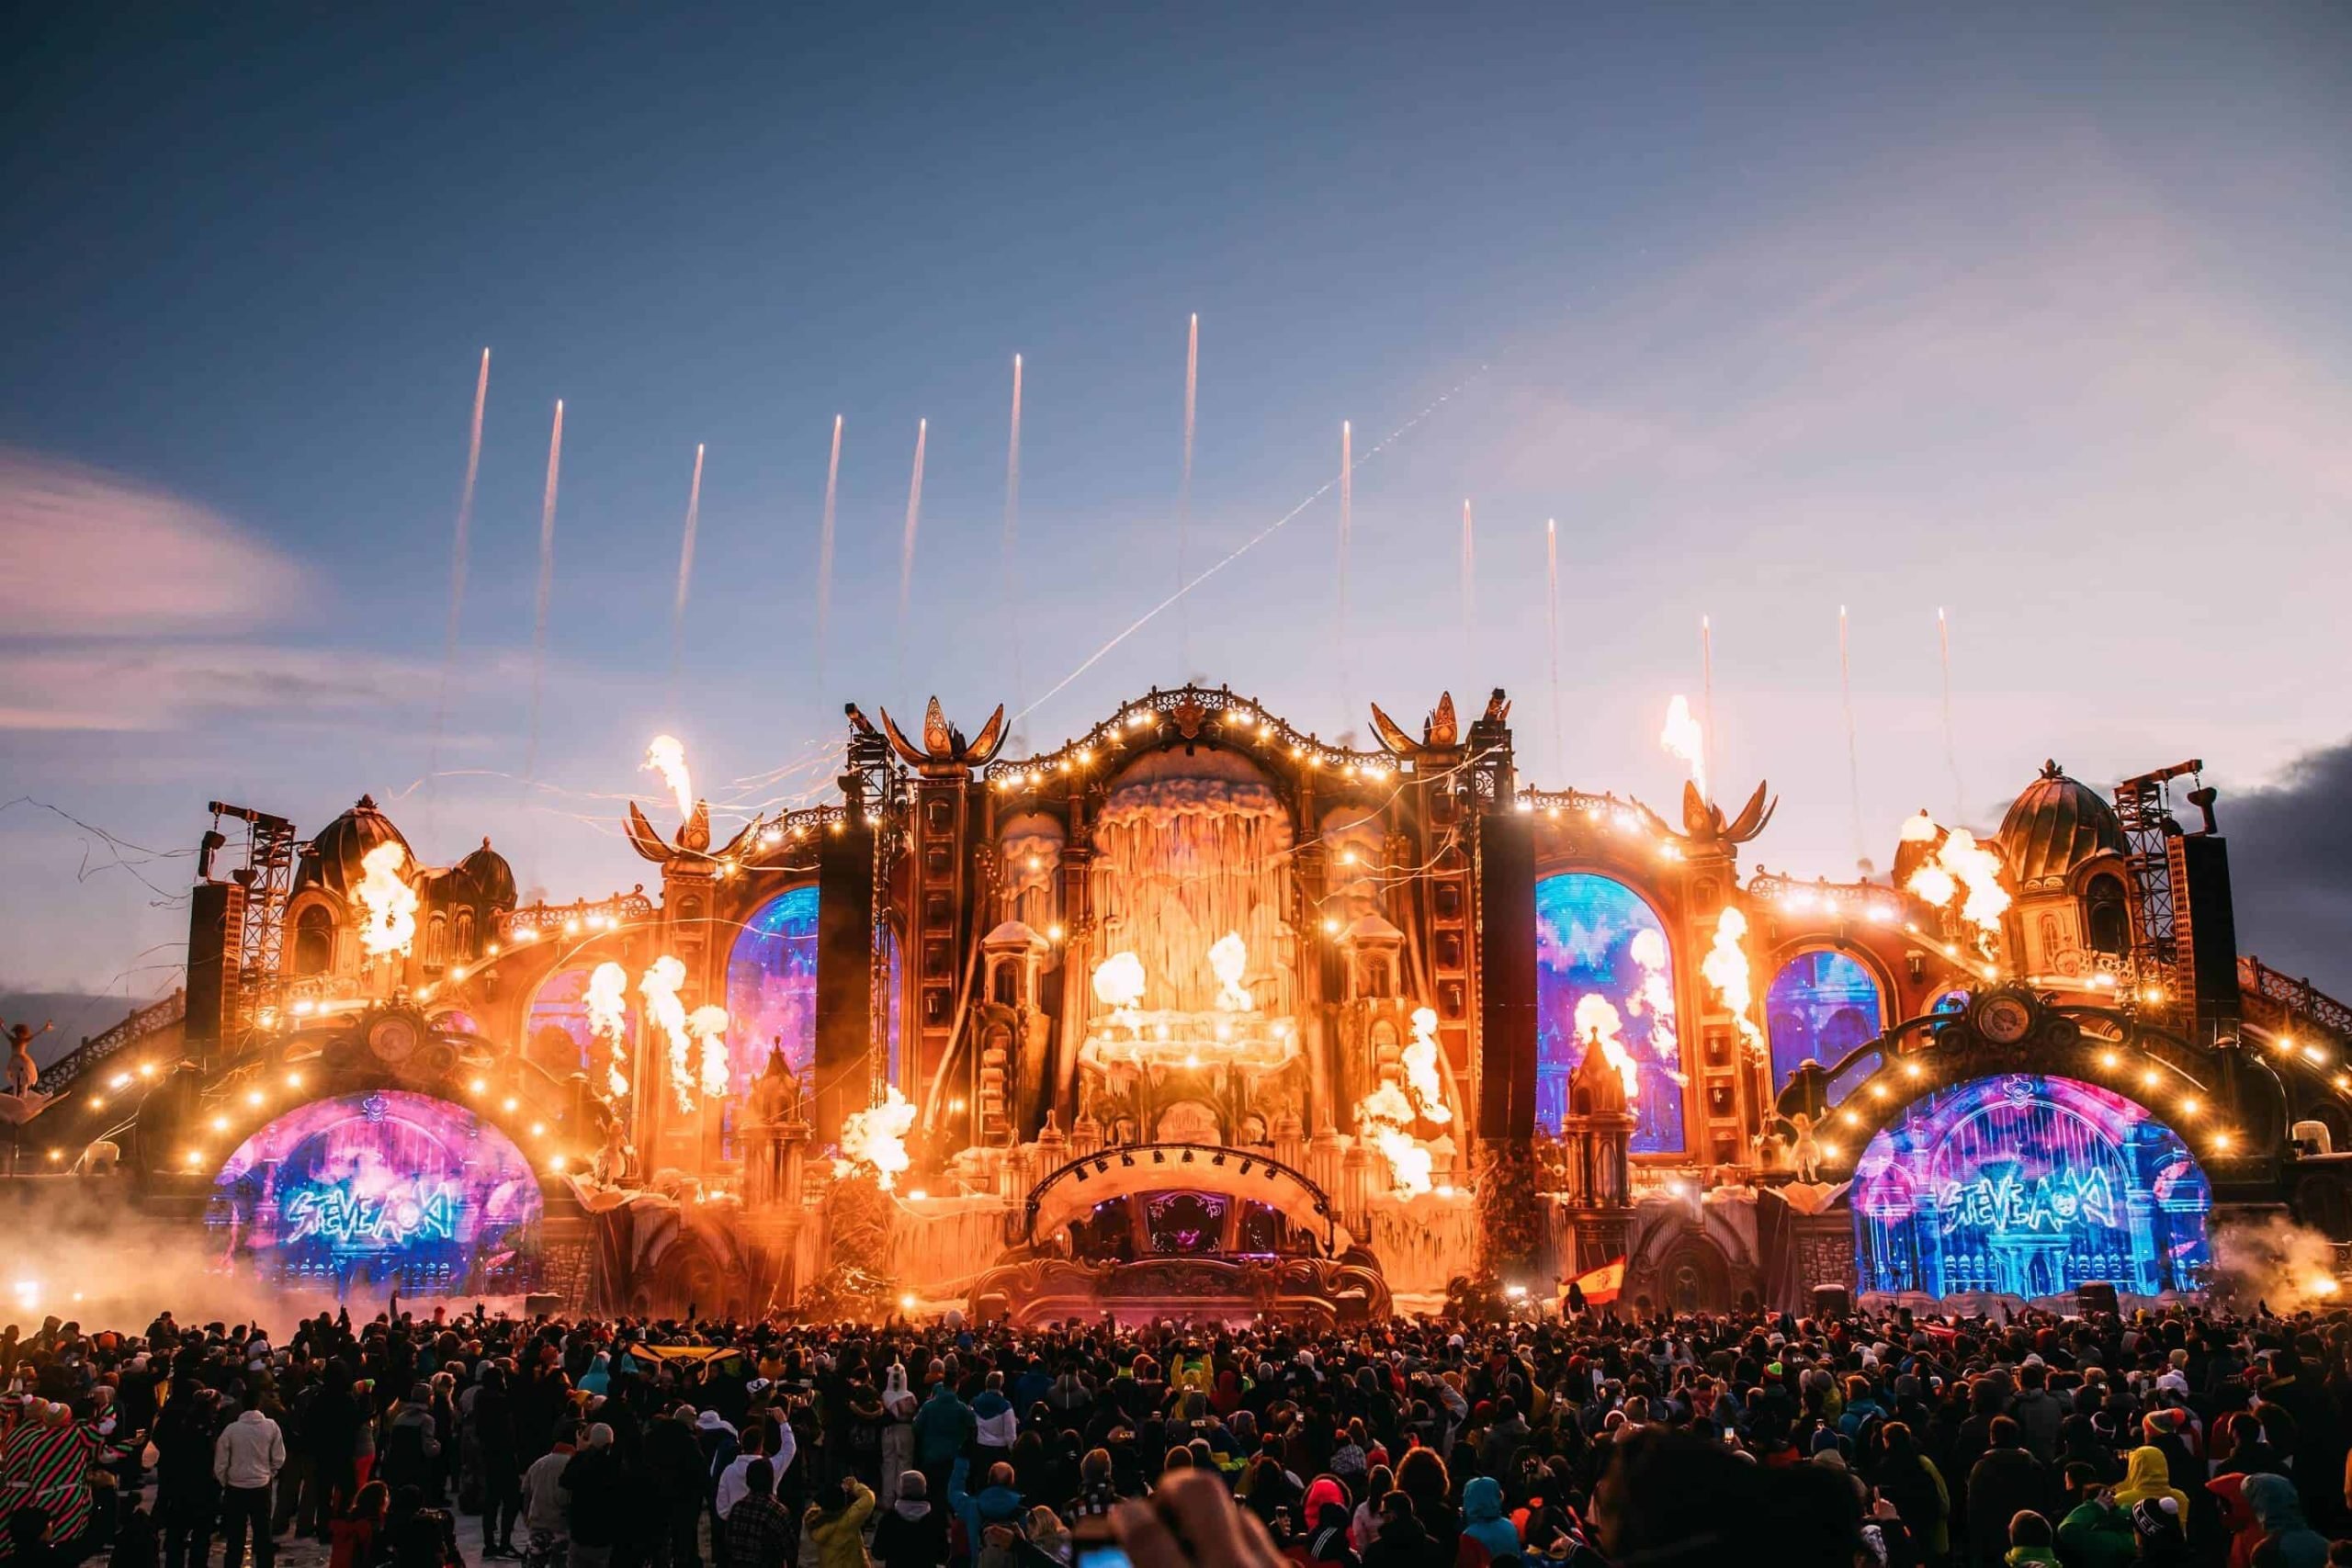 Tomorrowland 31.12.2020 aftermovie premiere available for 24 hours through Tomorrowland app